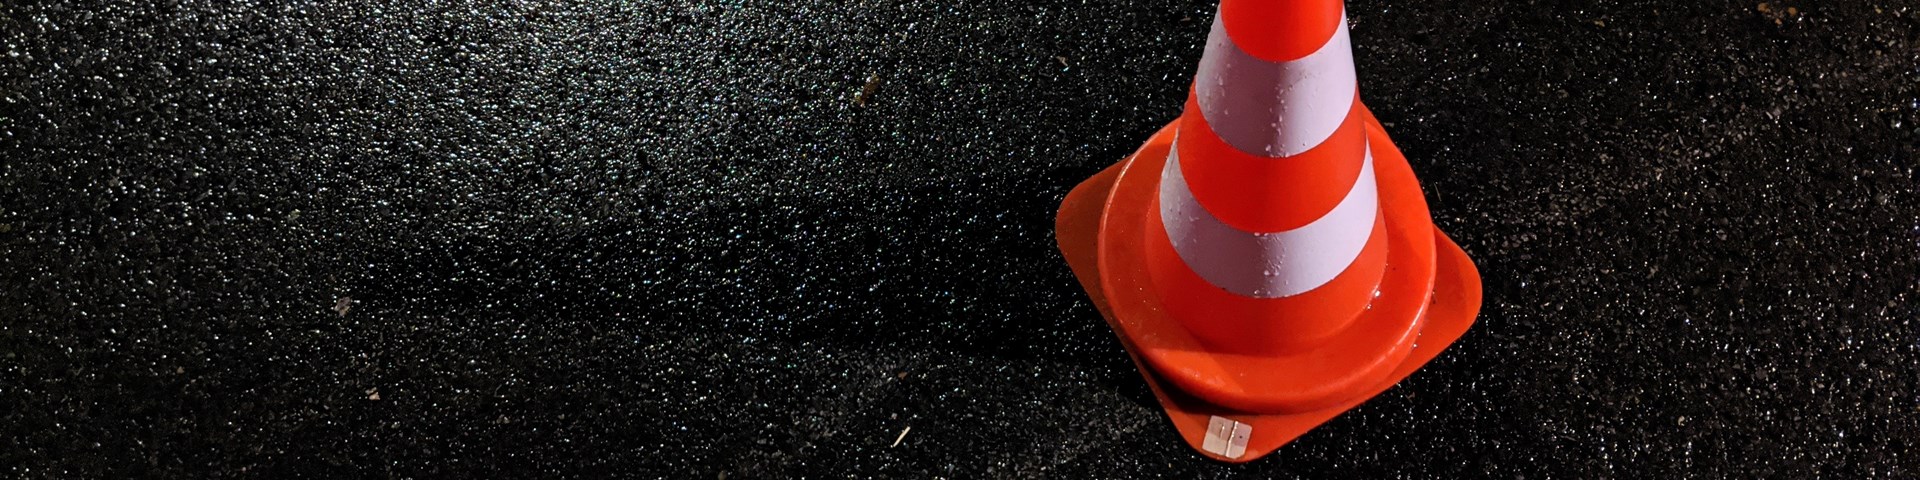 A red traffic cone on a road